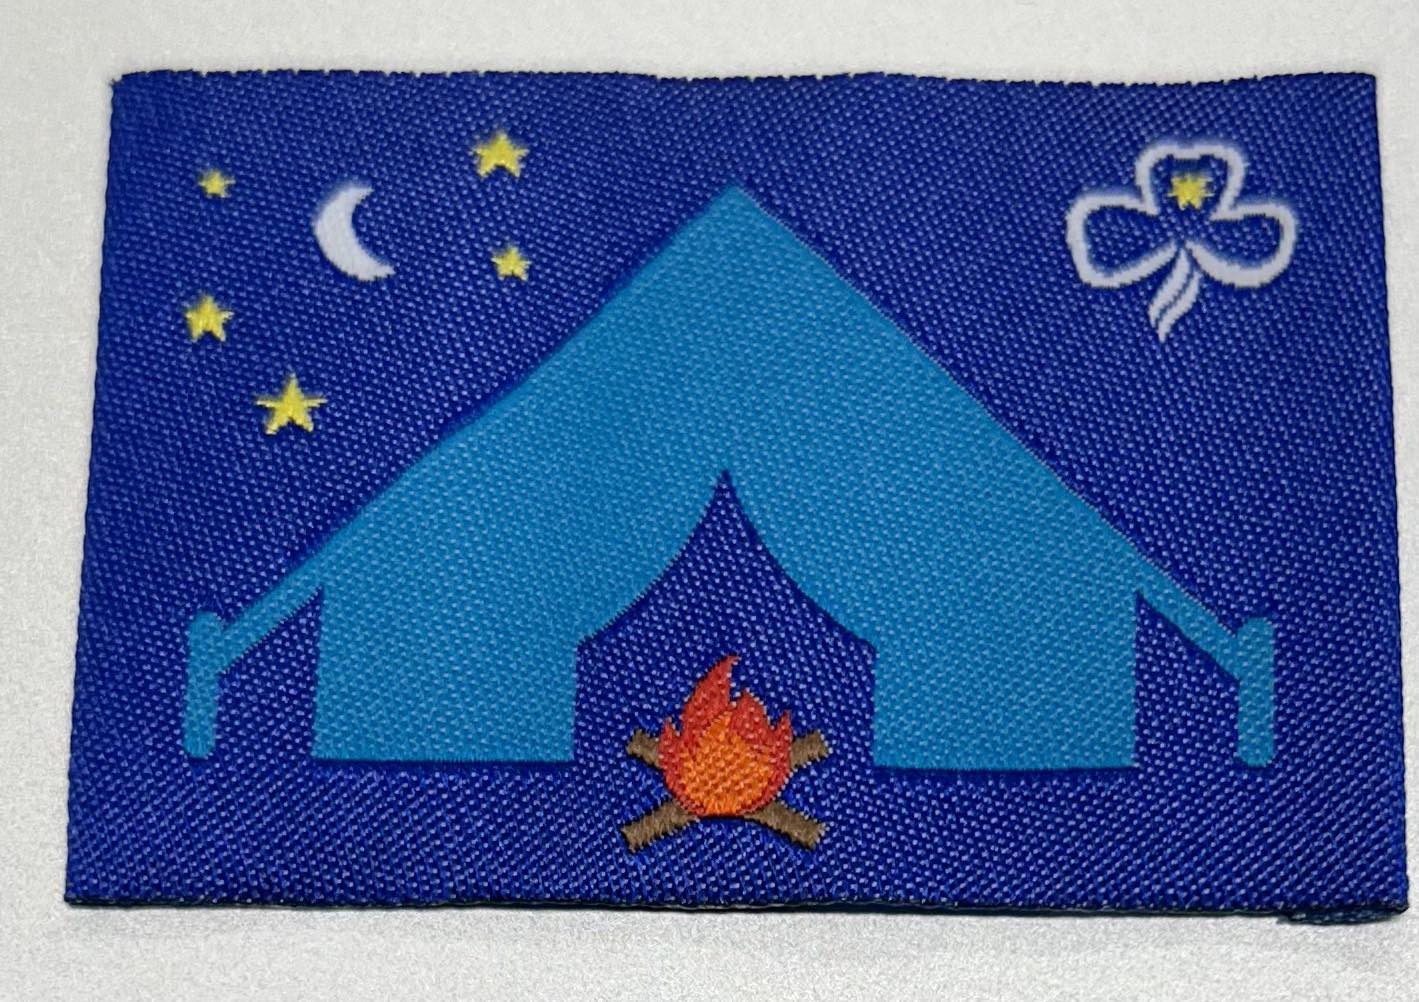 an unbound rectangular badge that has a royal blue background with a light blue tent, campfire, moon and stars